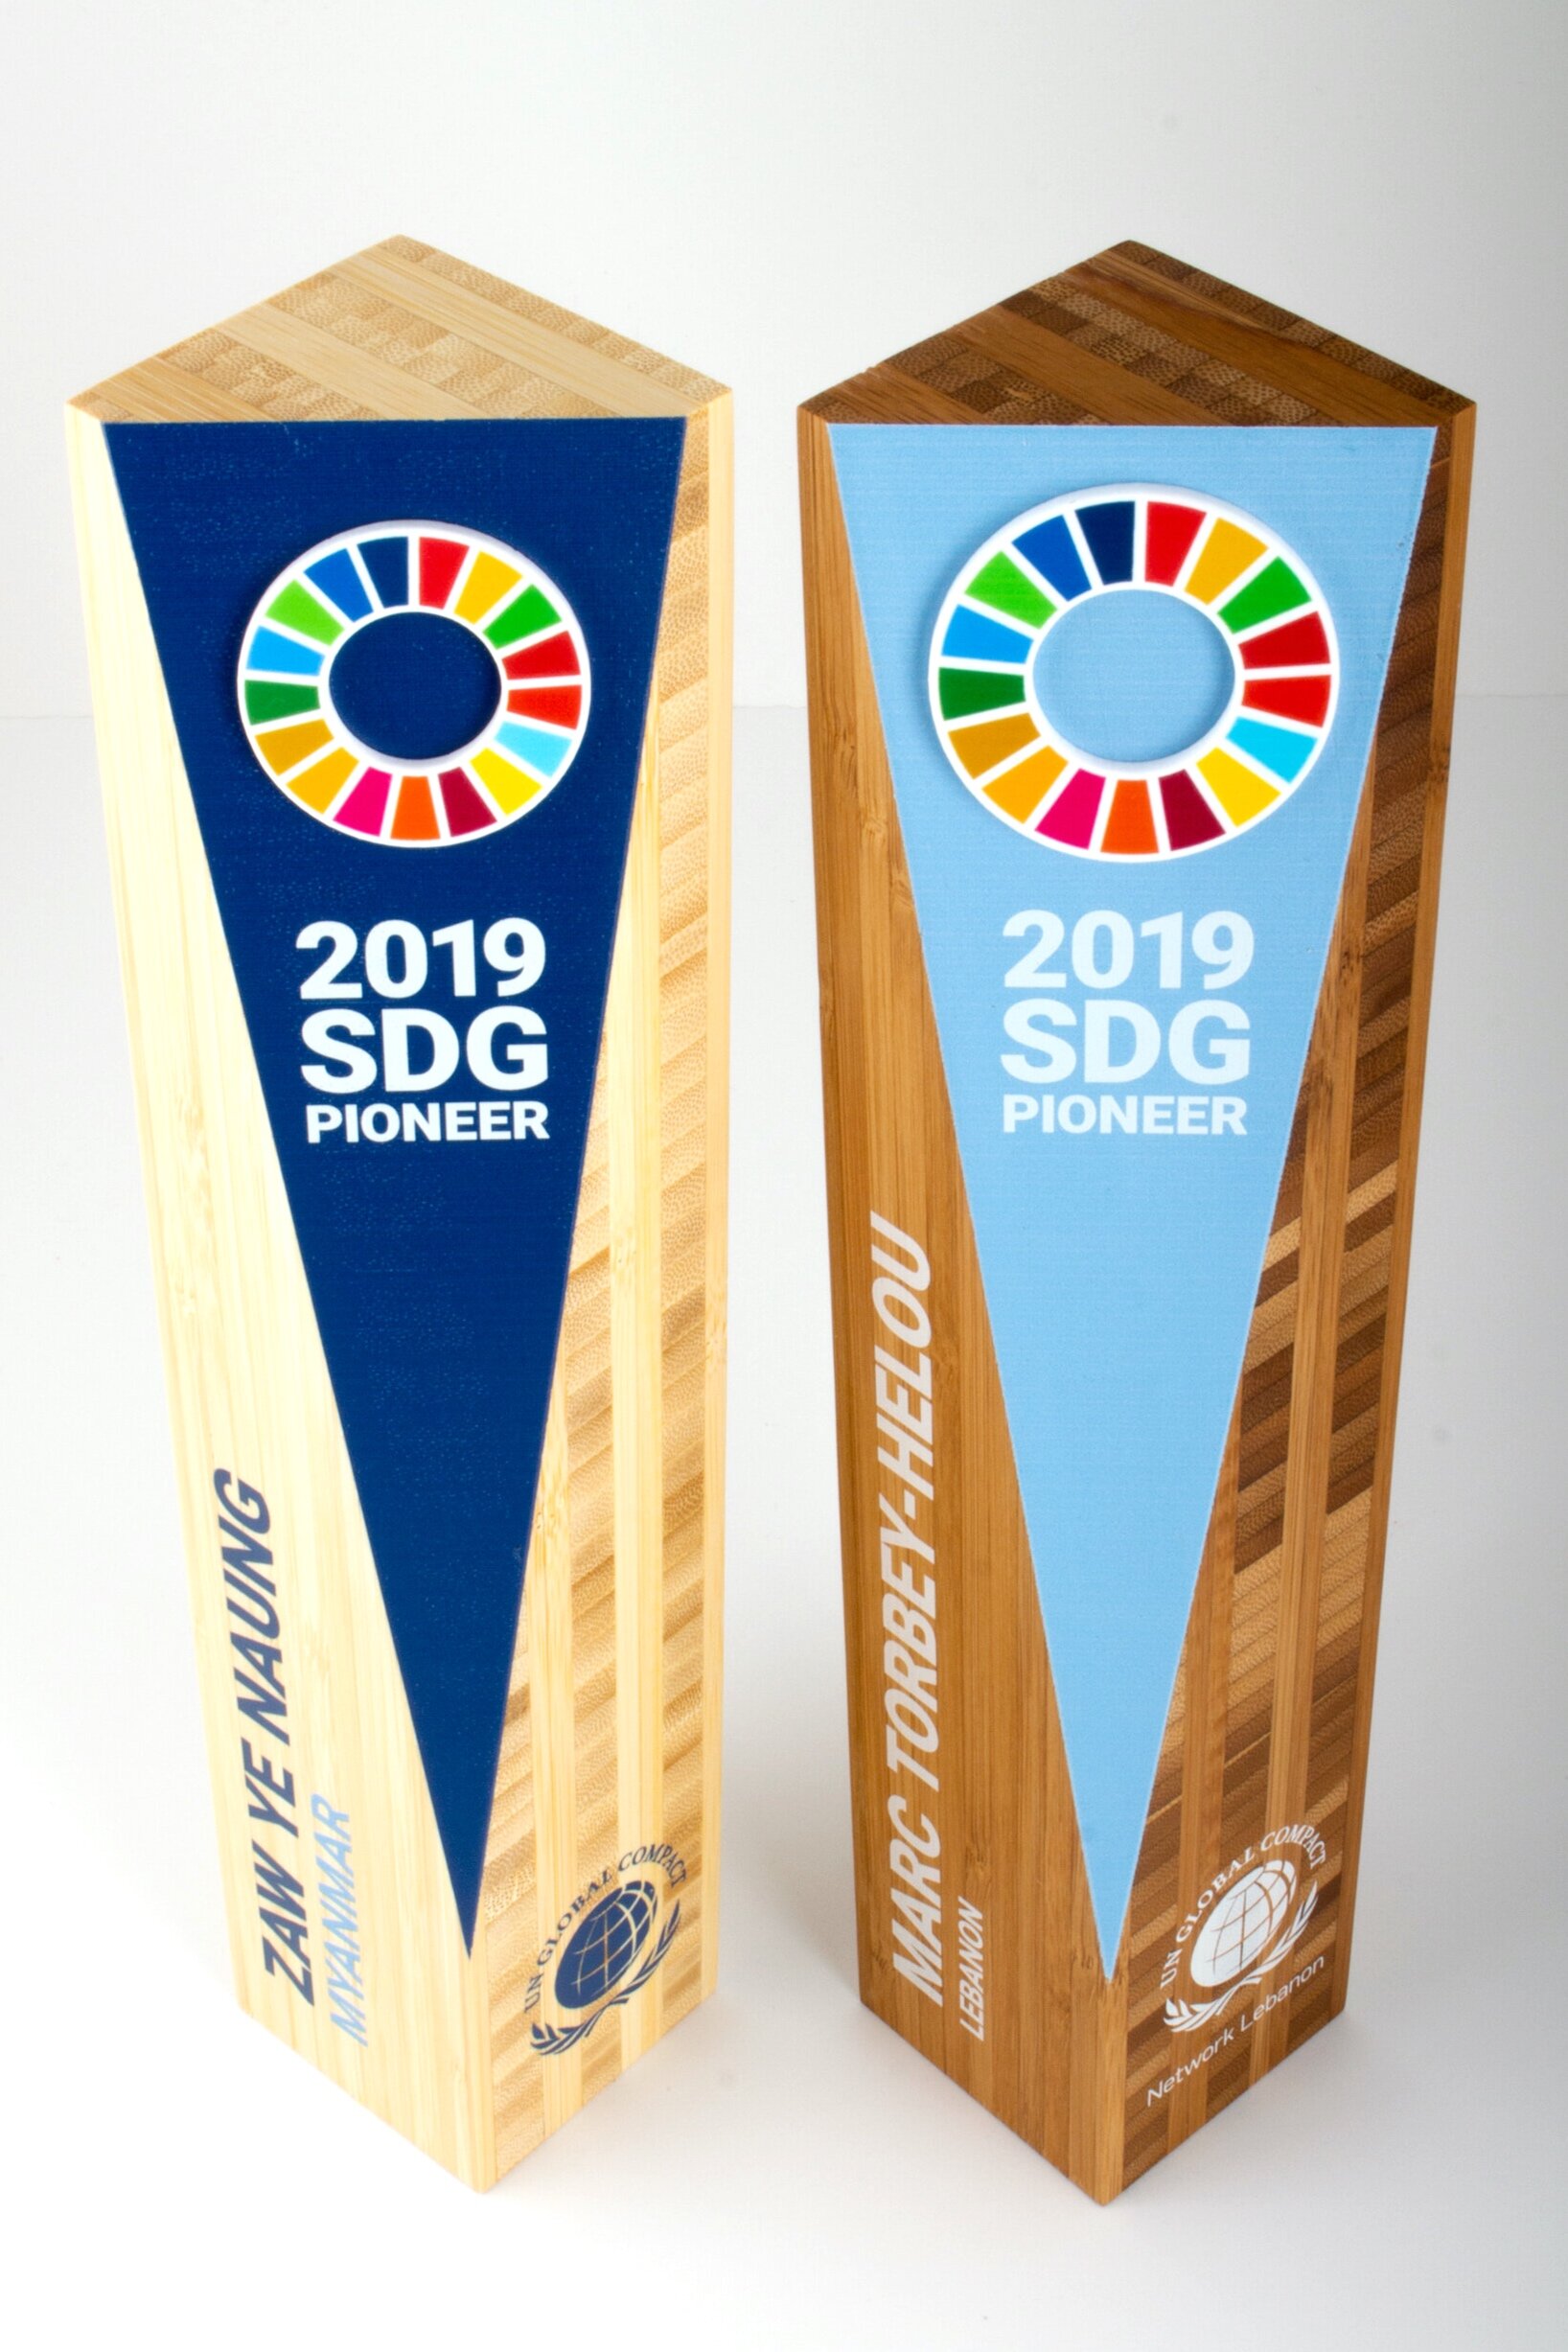 sdg pioneer eco award for sustainability practices UN global compact